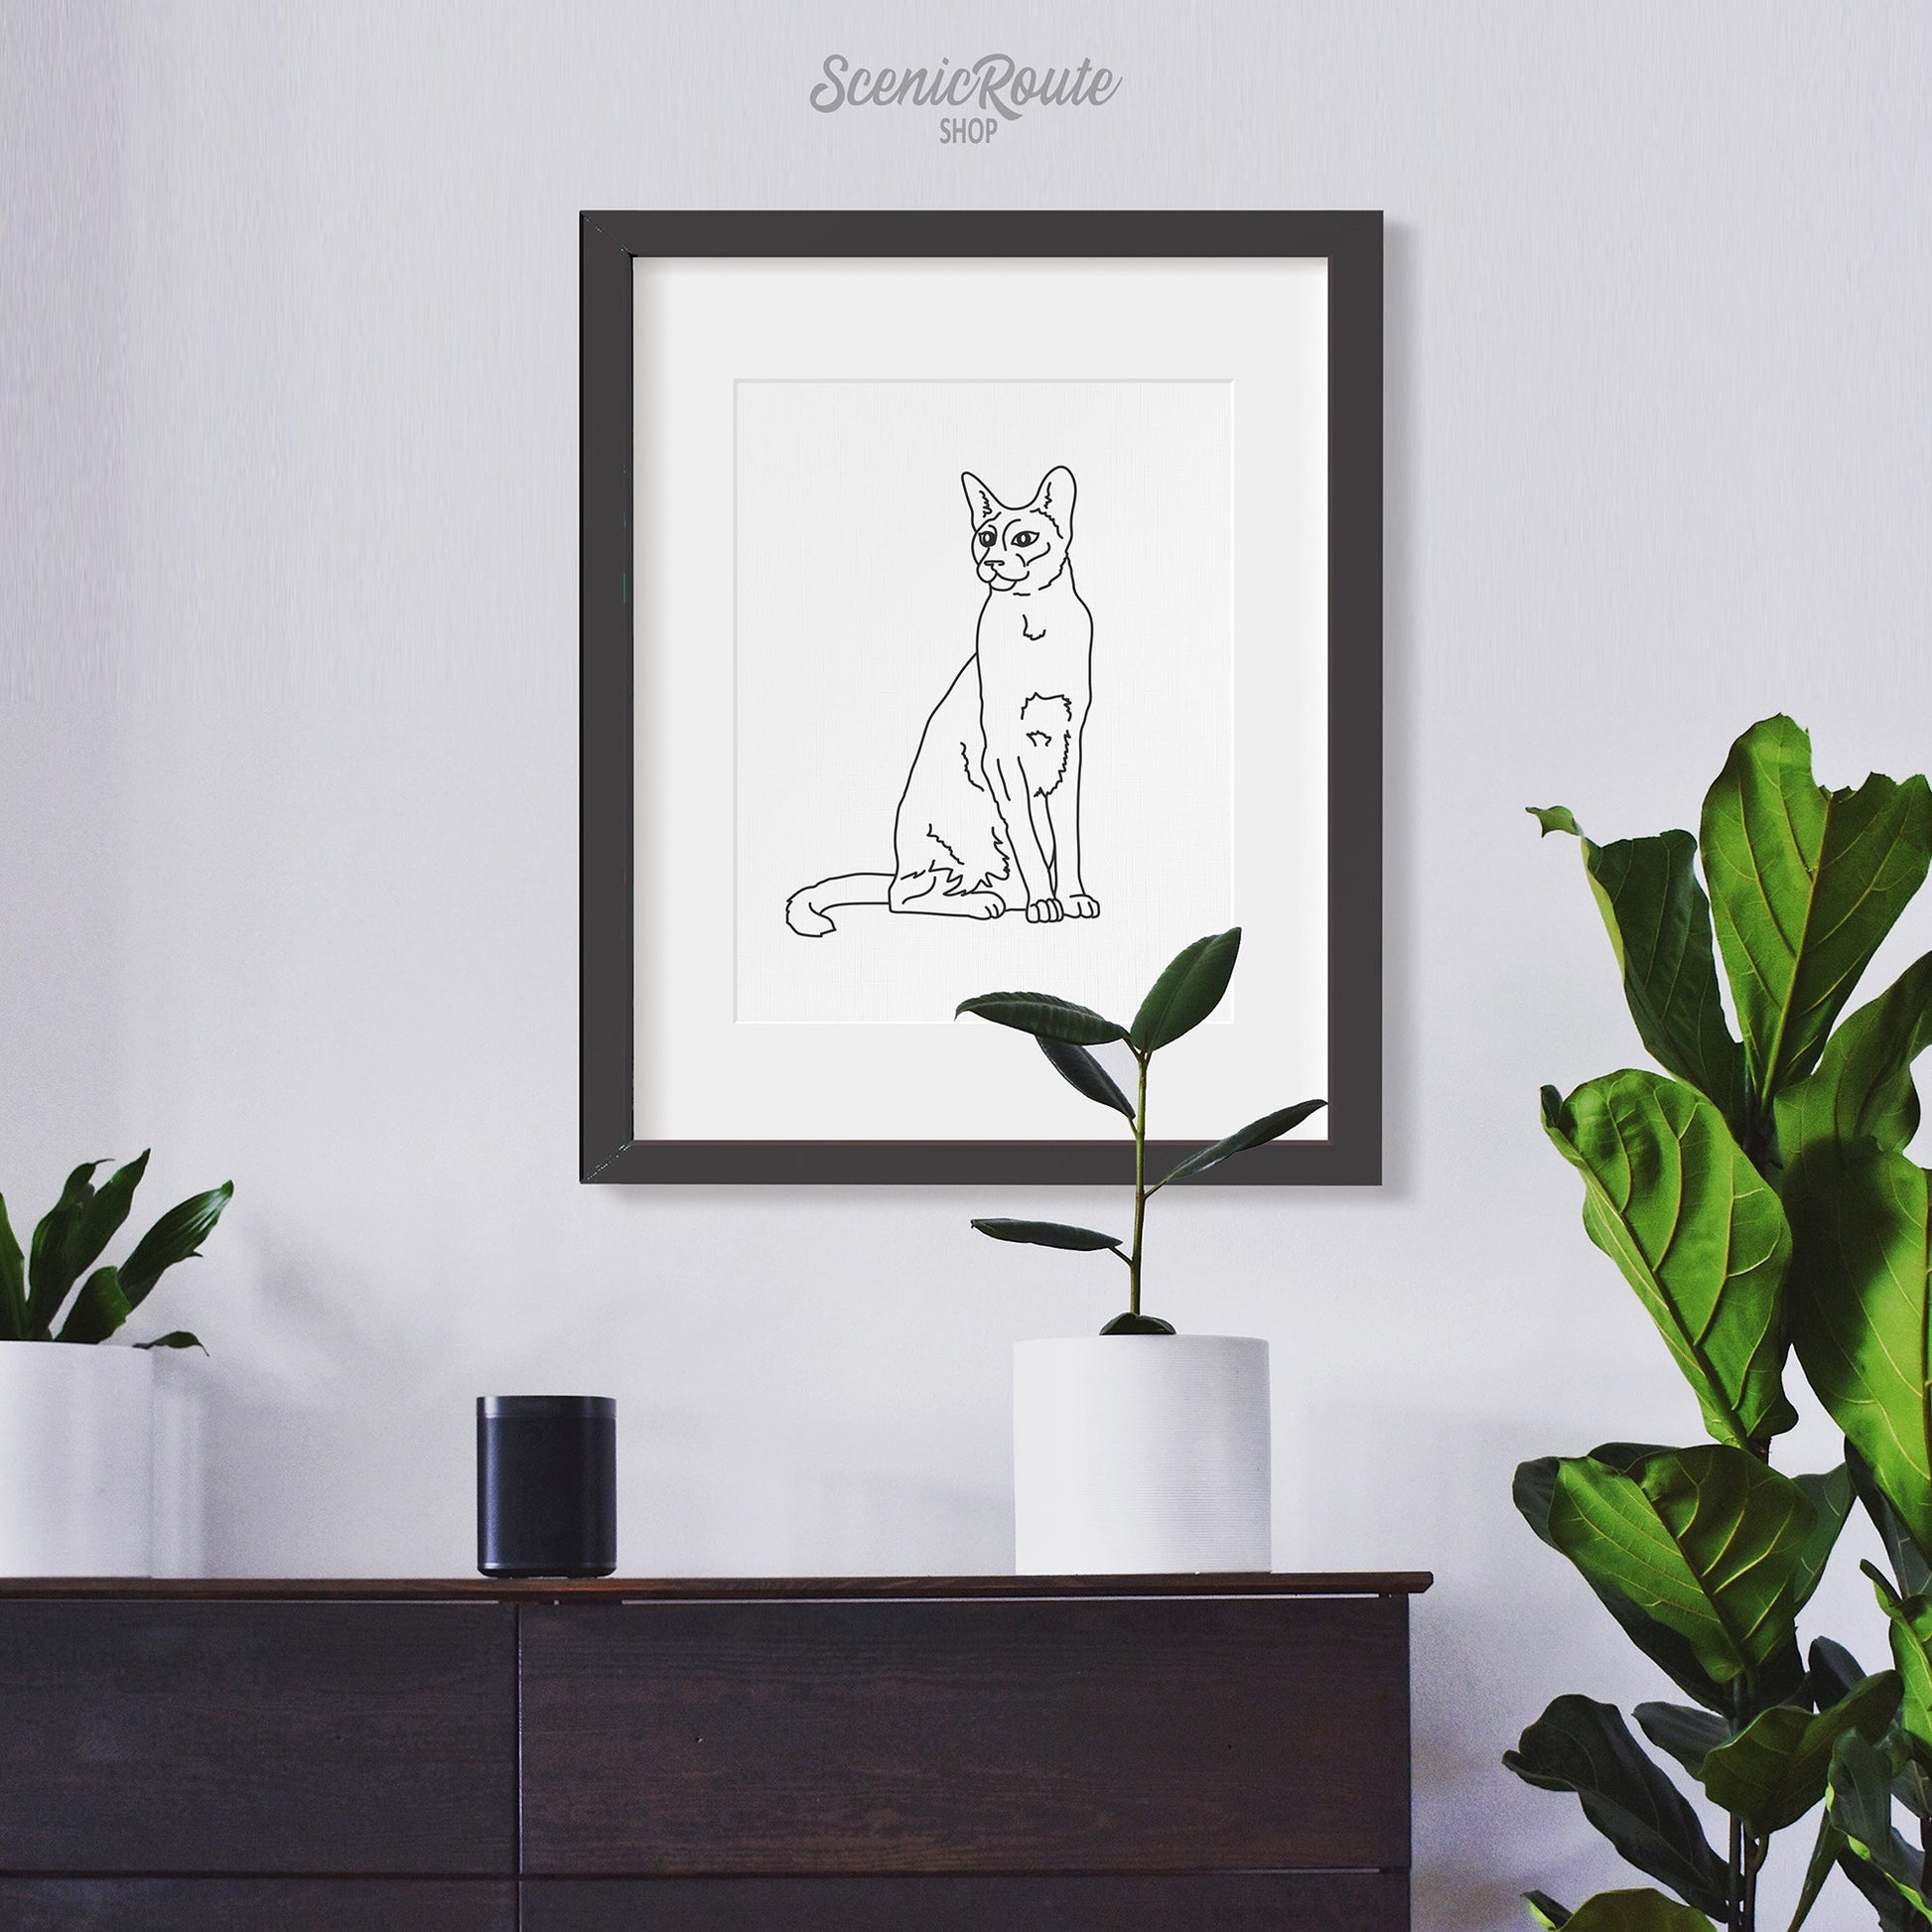 A framed line art drawing of a Siamese cat hanging above a dresser with plants